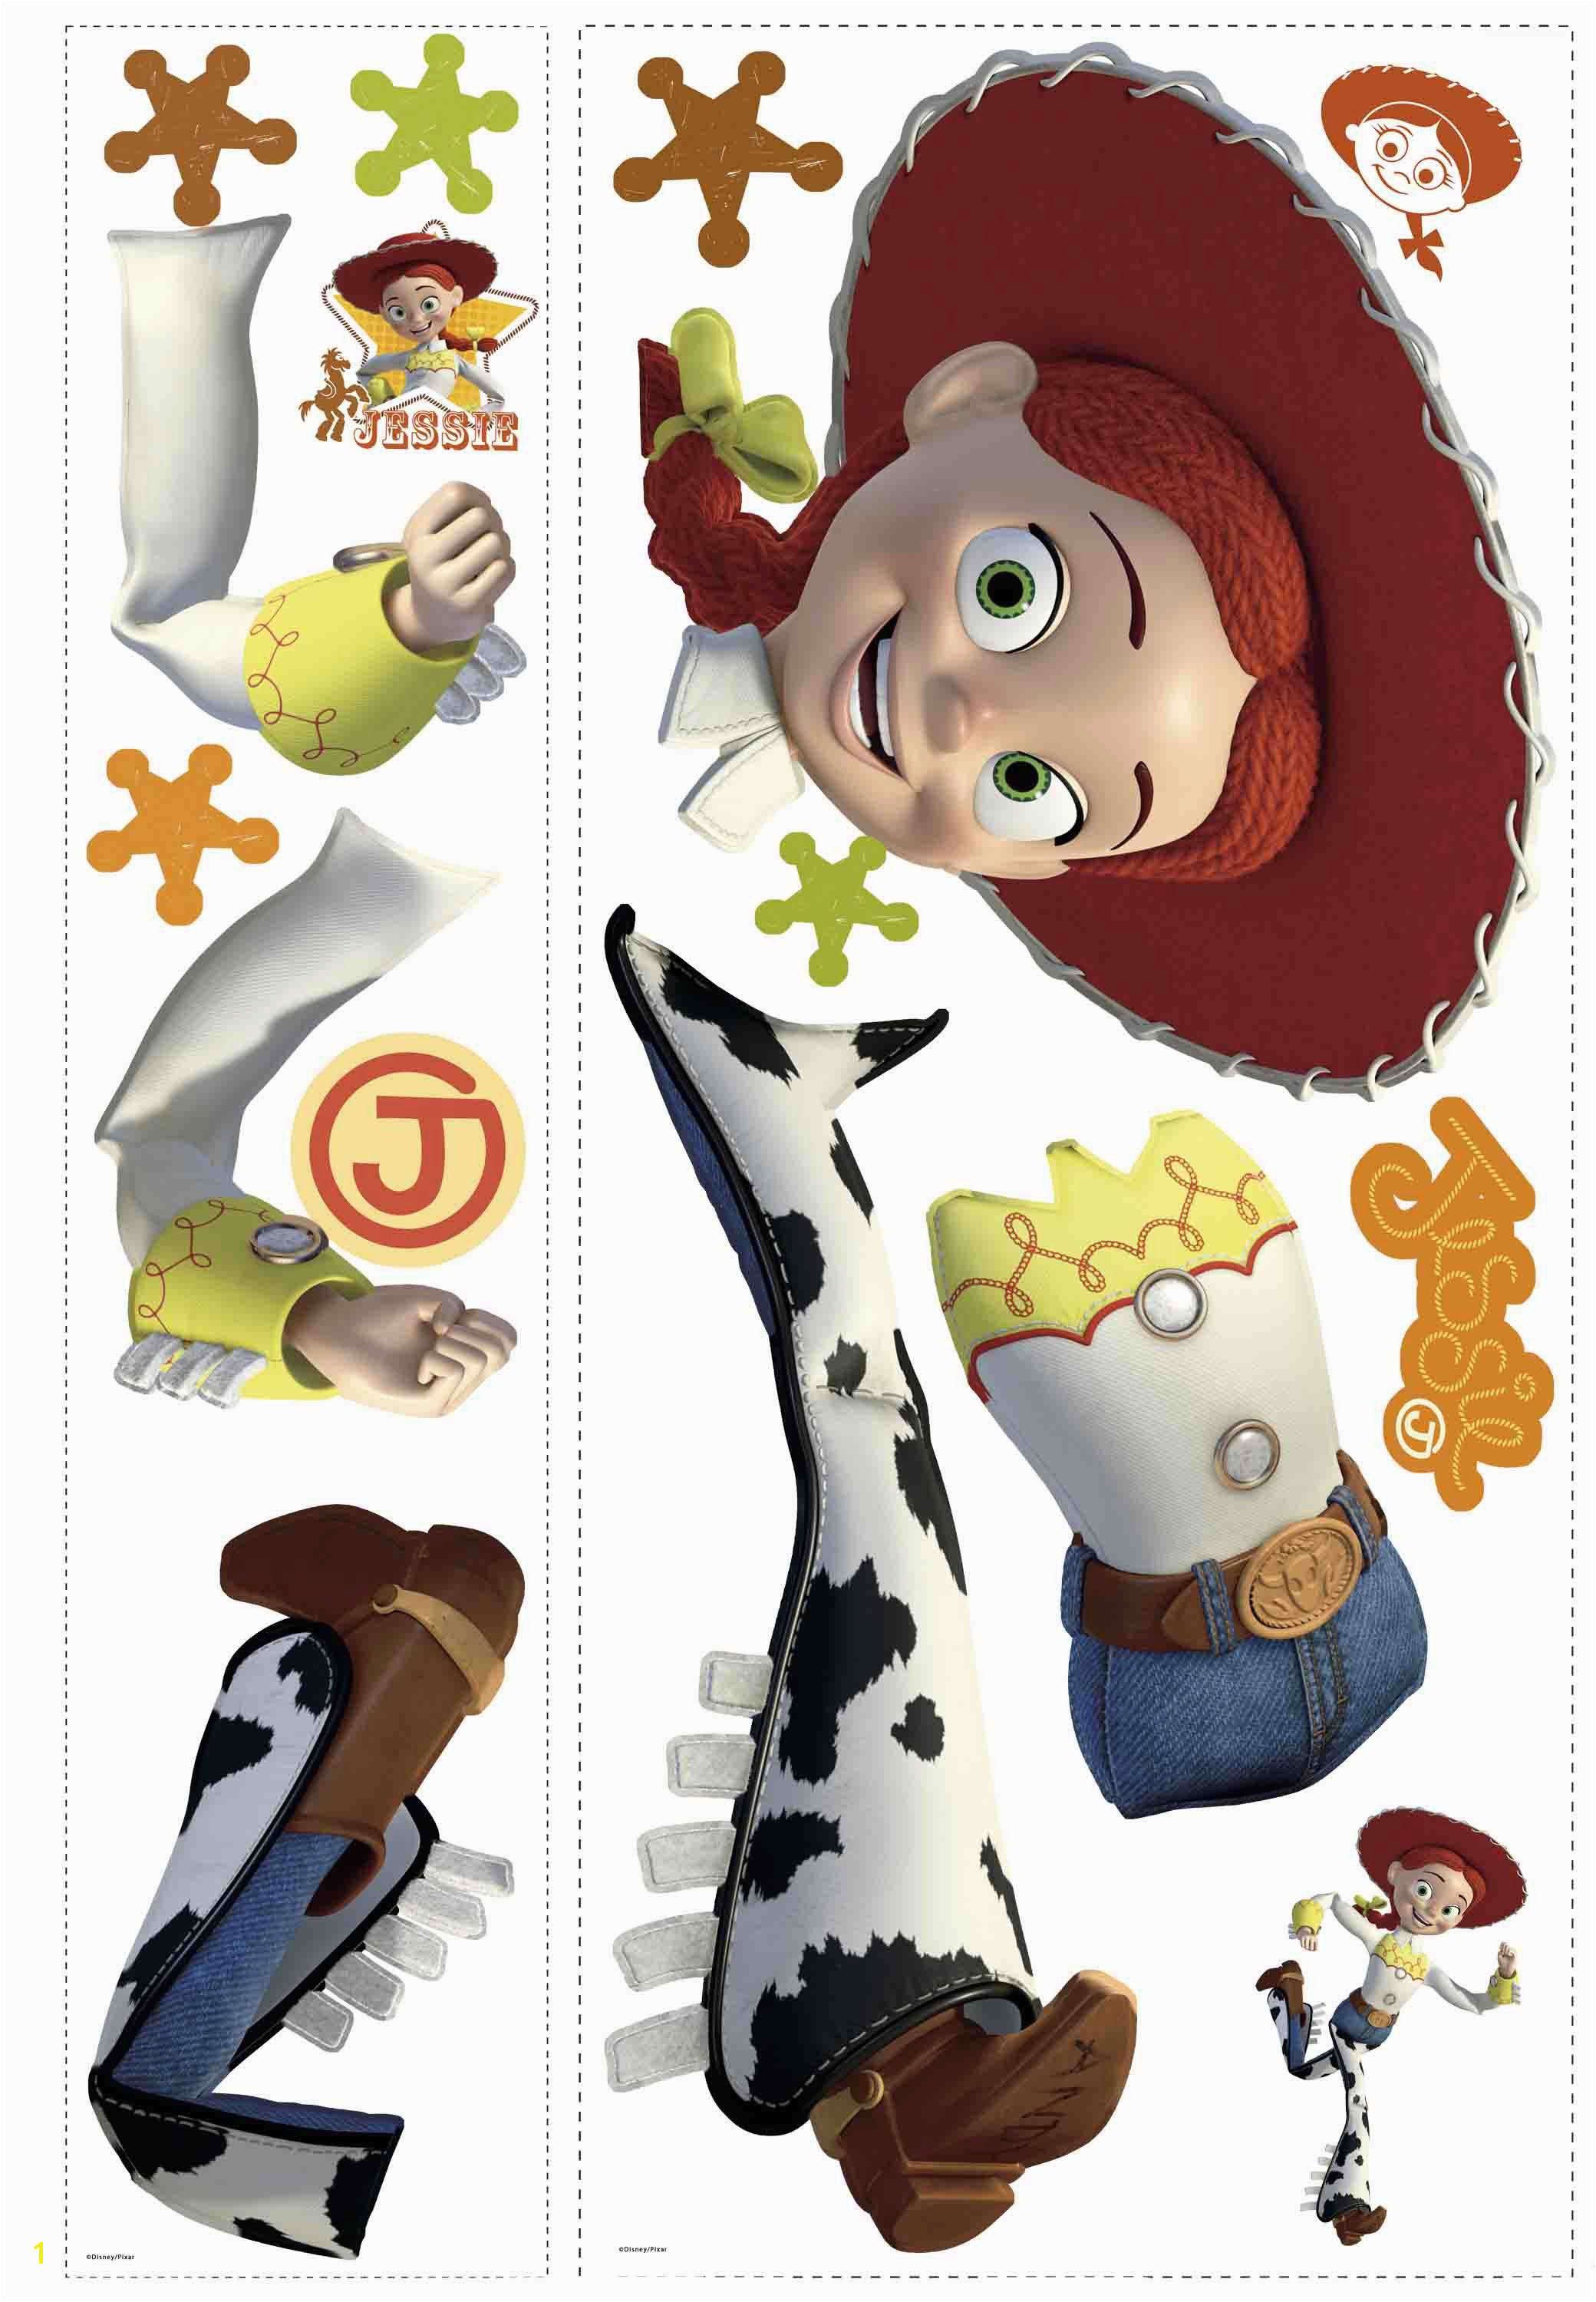 Disney "Toy Story 3" Jessie Wall Decal Cutout 26"x46" Printed Sheet